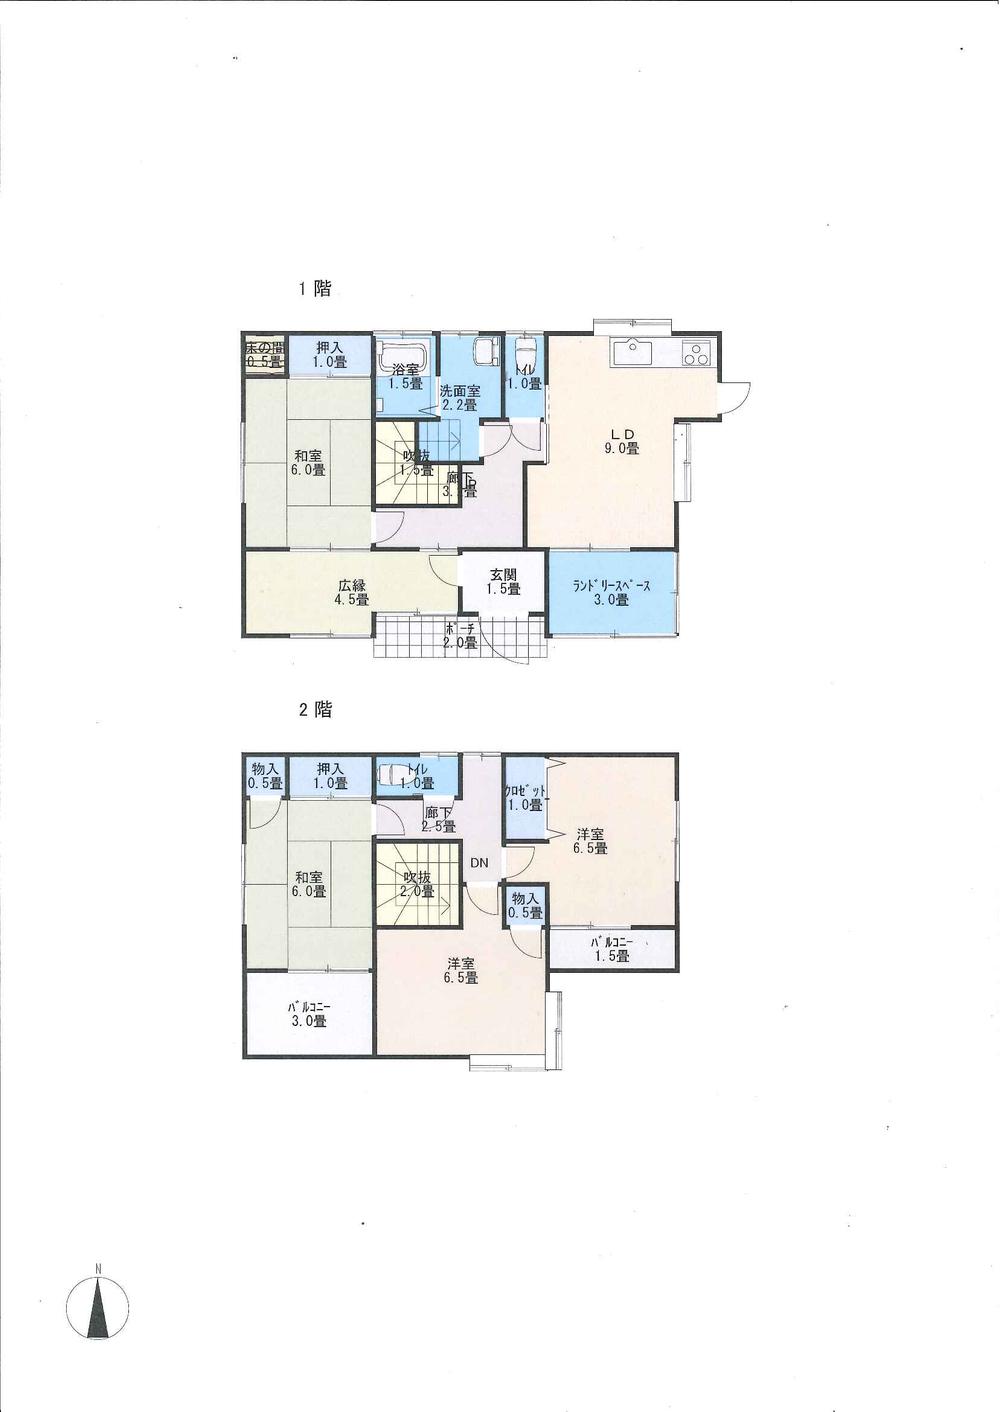 Floor plan. 13 million yen, 4LDK + S (storeroom), Land area 151.04 sq m , Building area 97.77 sq m also laundry when outside the room safe with sun room